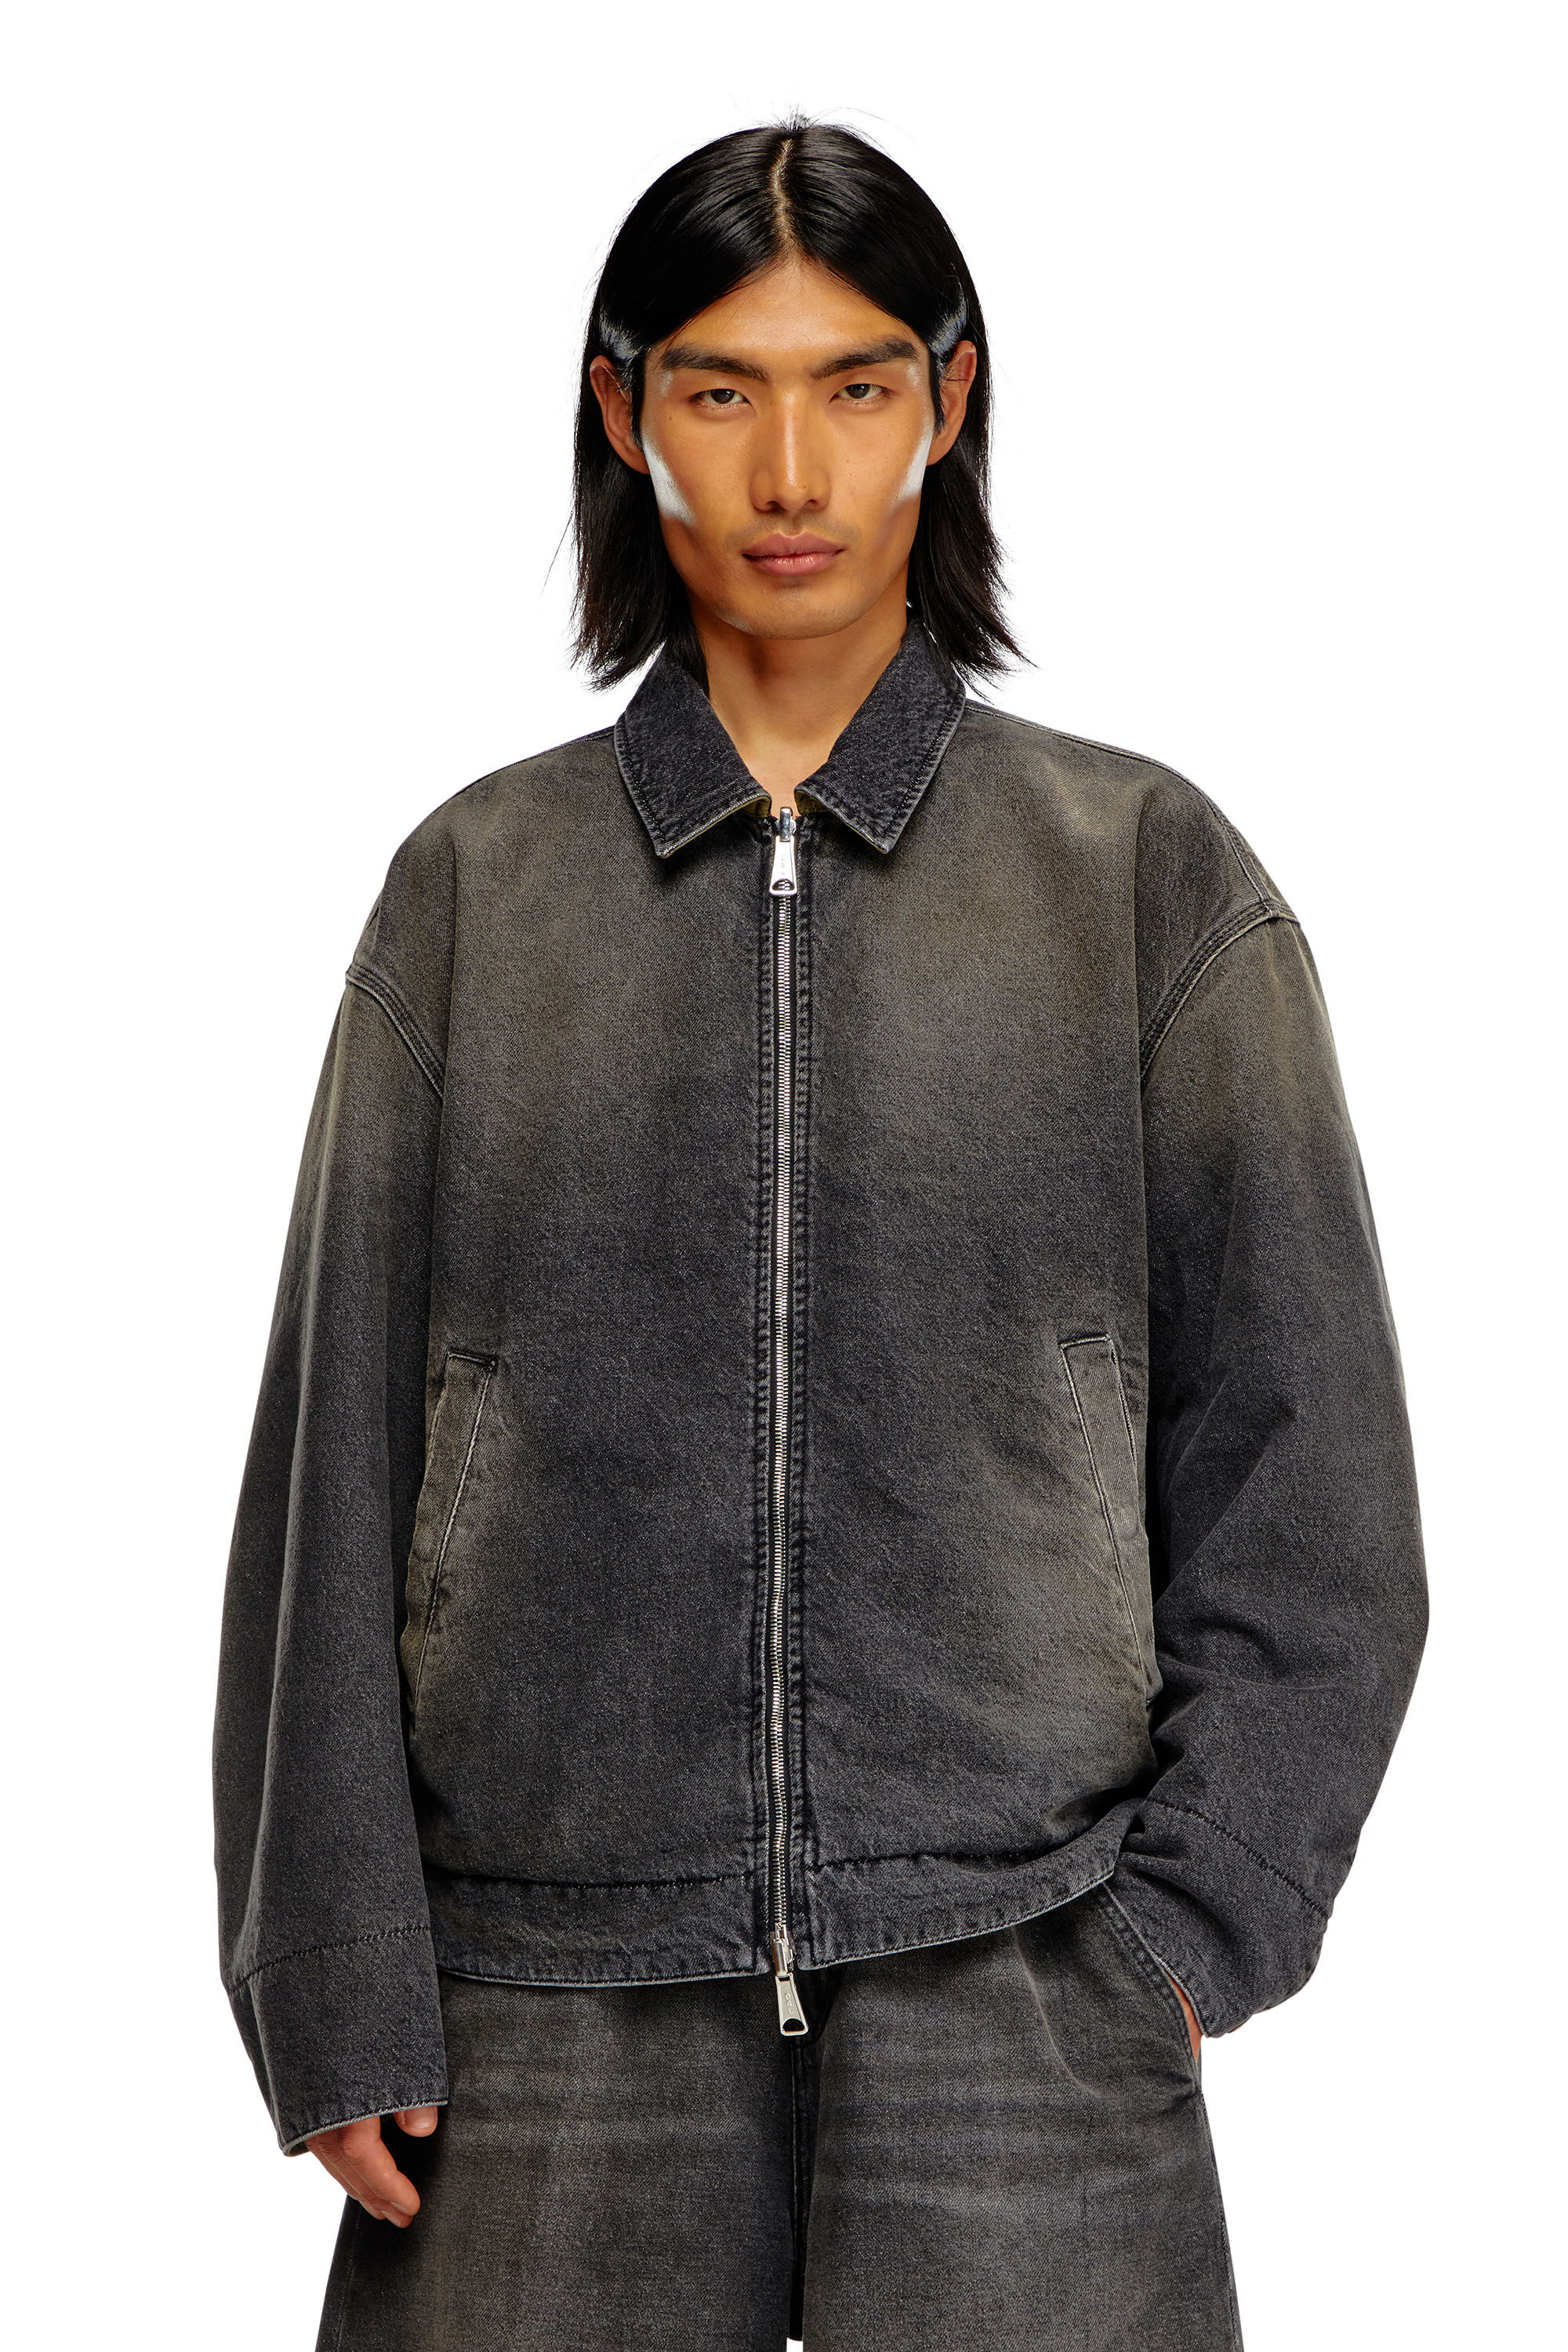 Diesel - D-STACK-S, Male Reversible jacket in denim and nylon in ブラック - Image 6